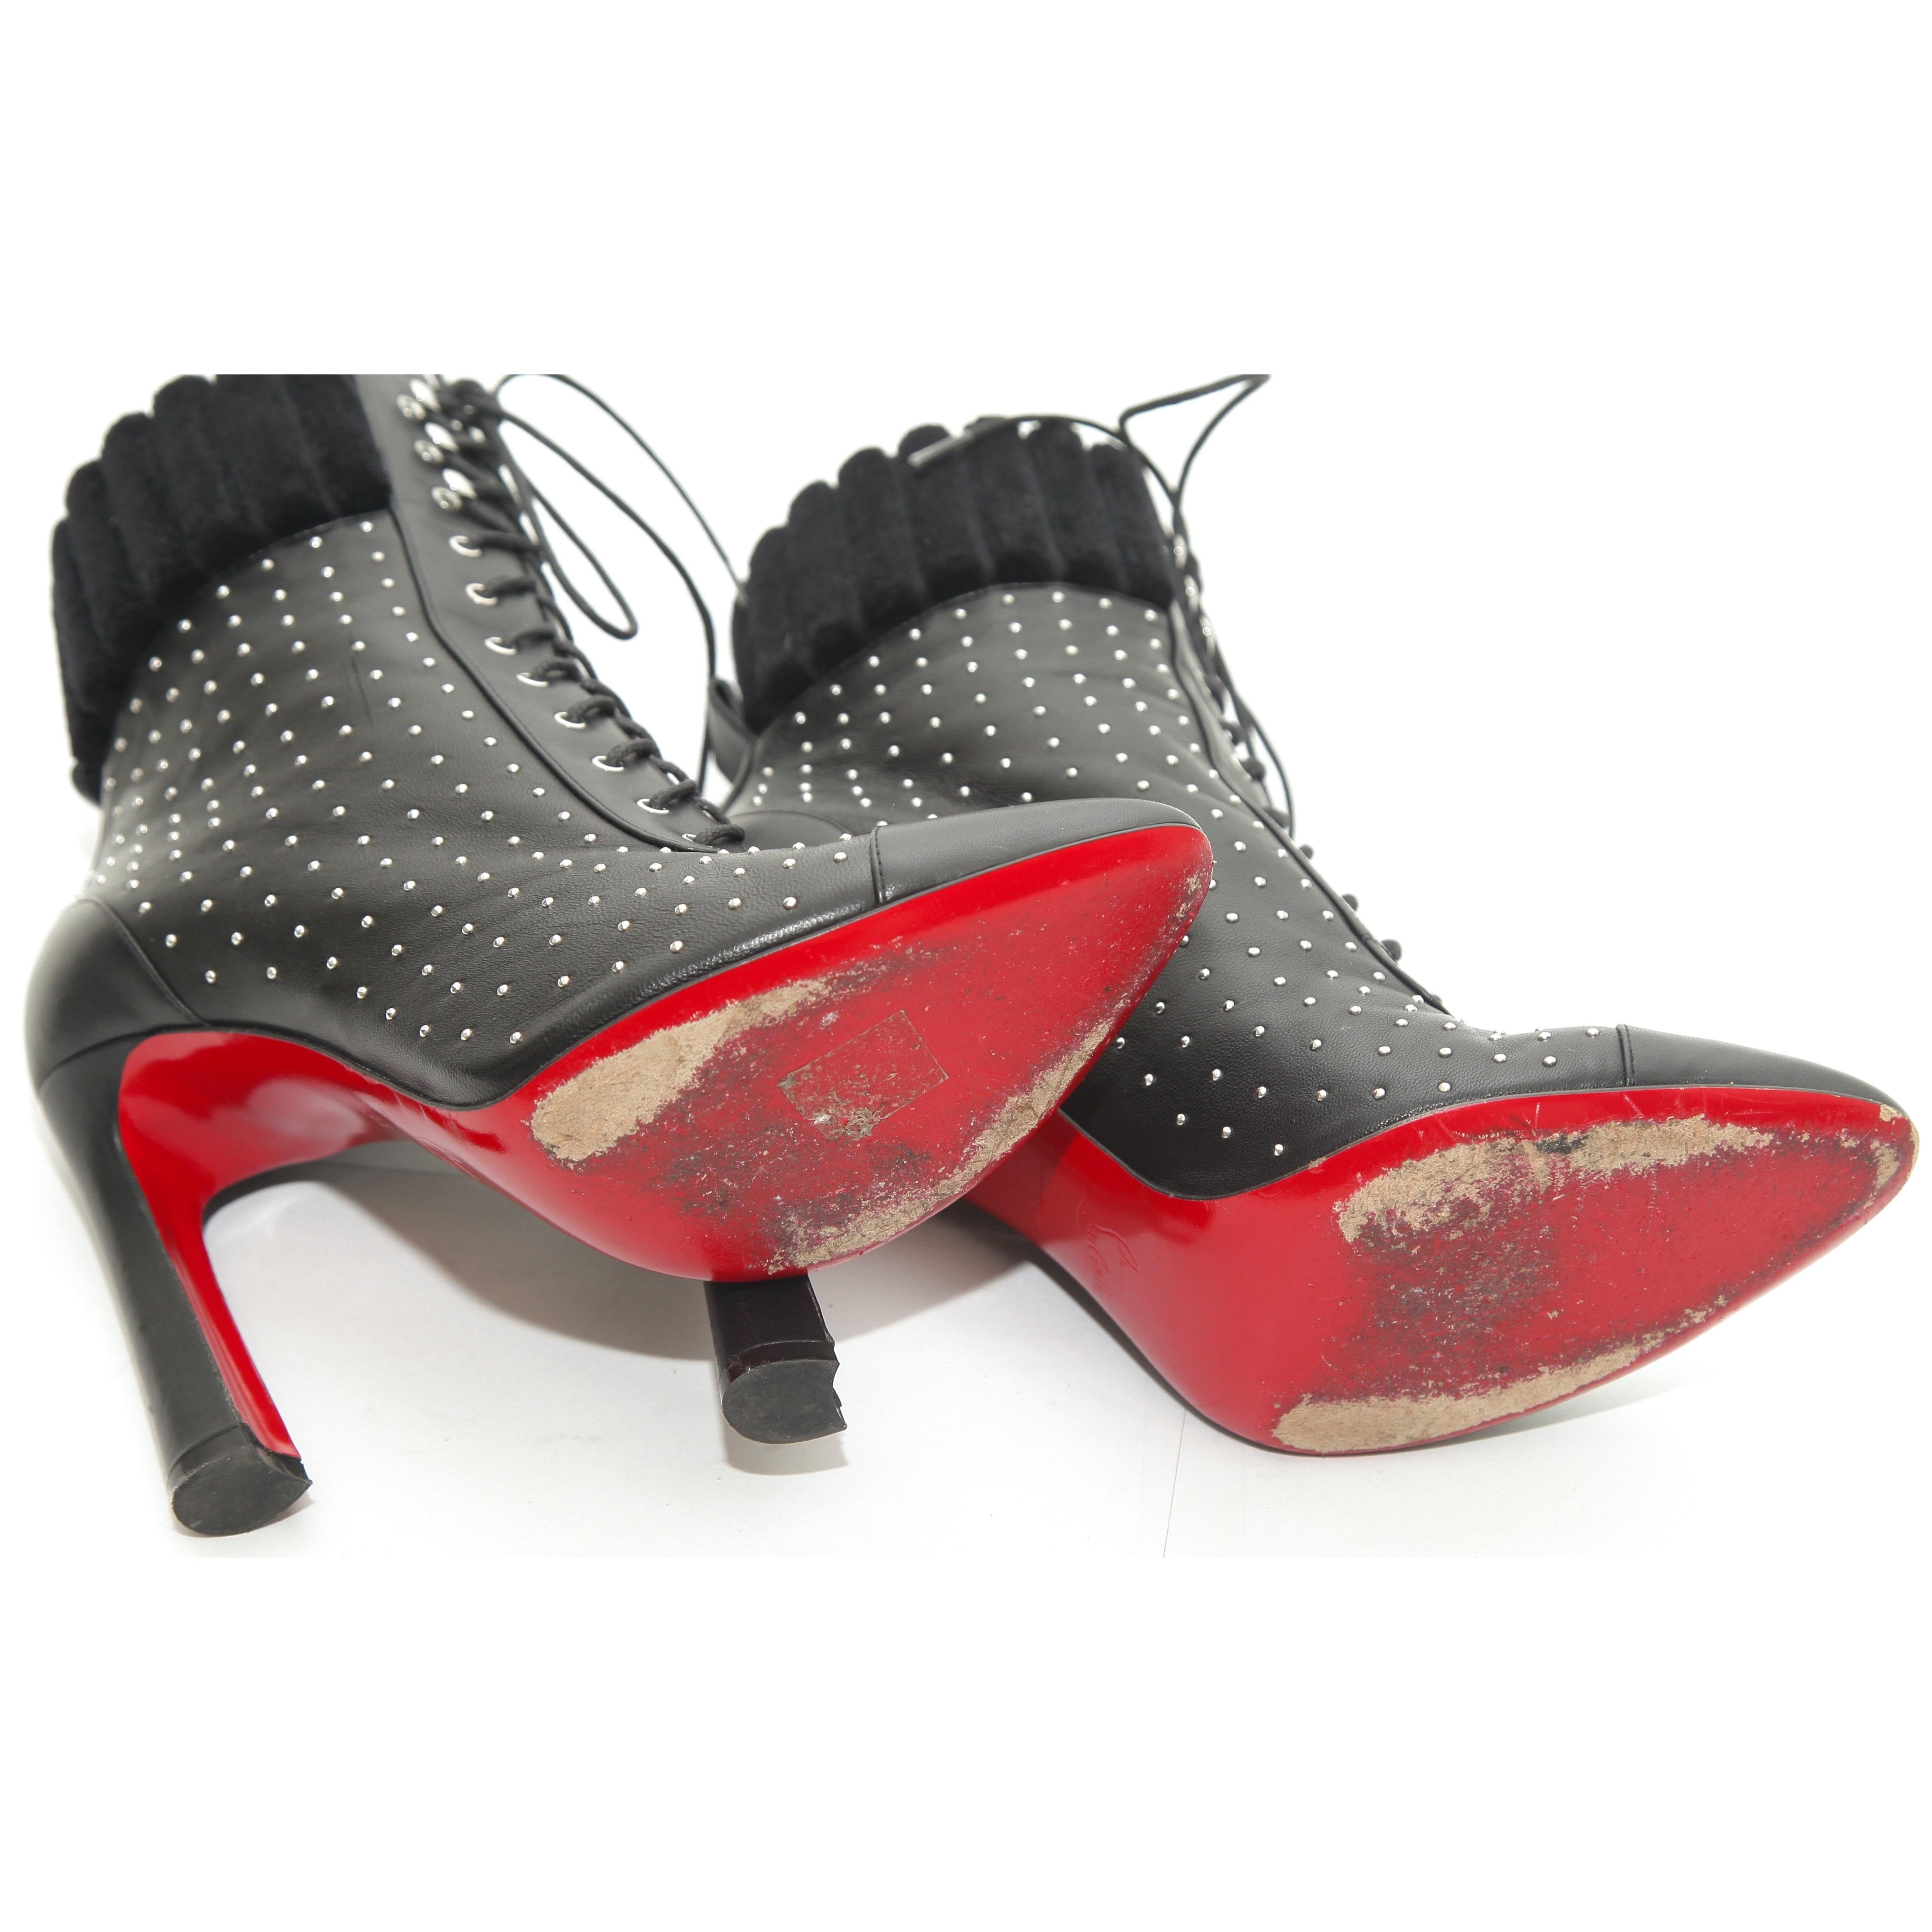 CHRISTIAN LOUBOUTIN Black Leather Ankle Boot Silver Studs Lace Up Toe Sz 38.5 For Sale 2